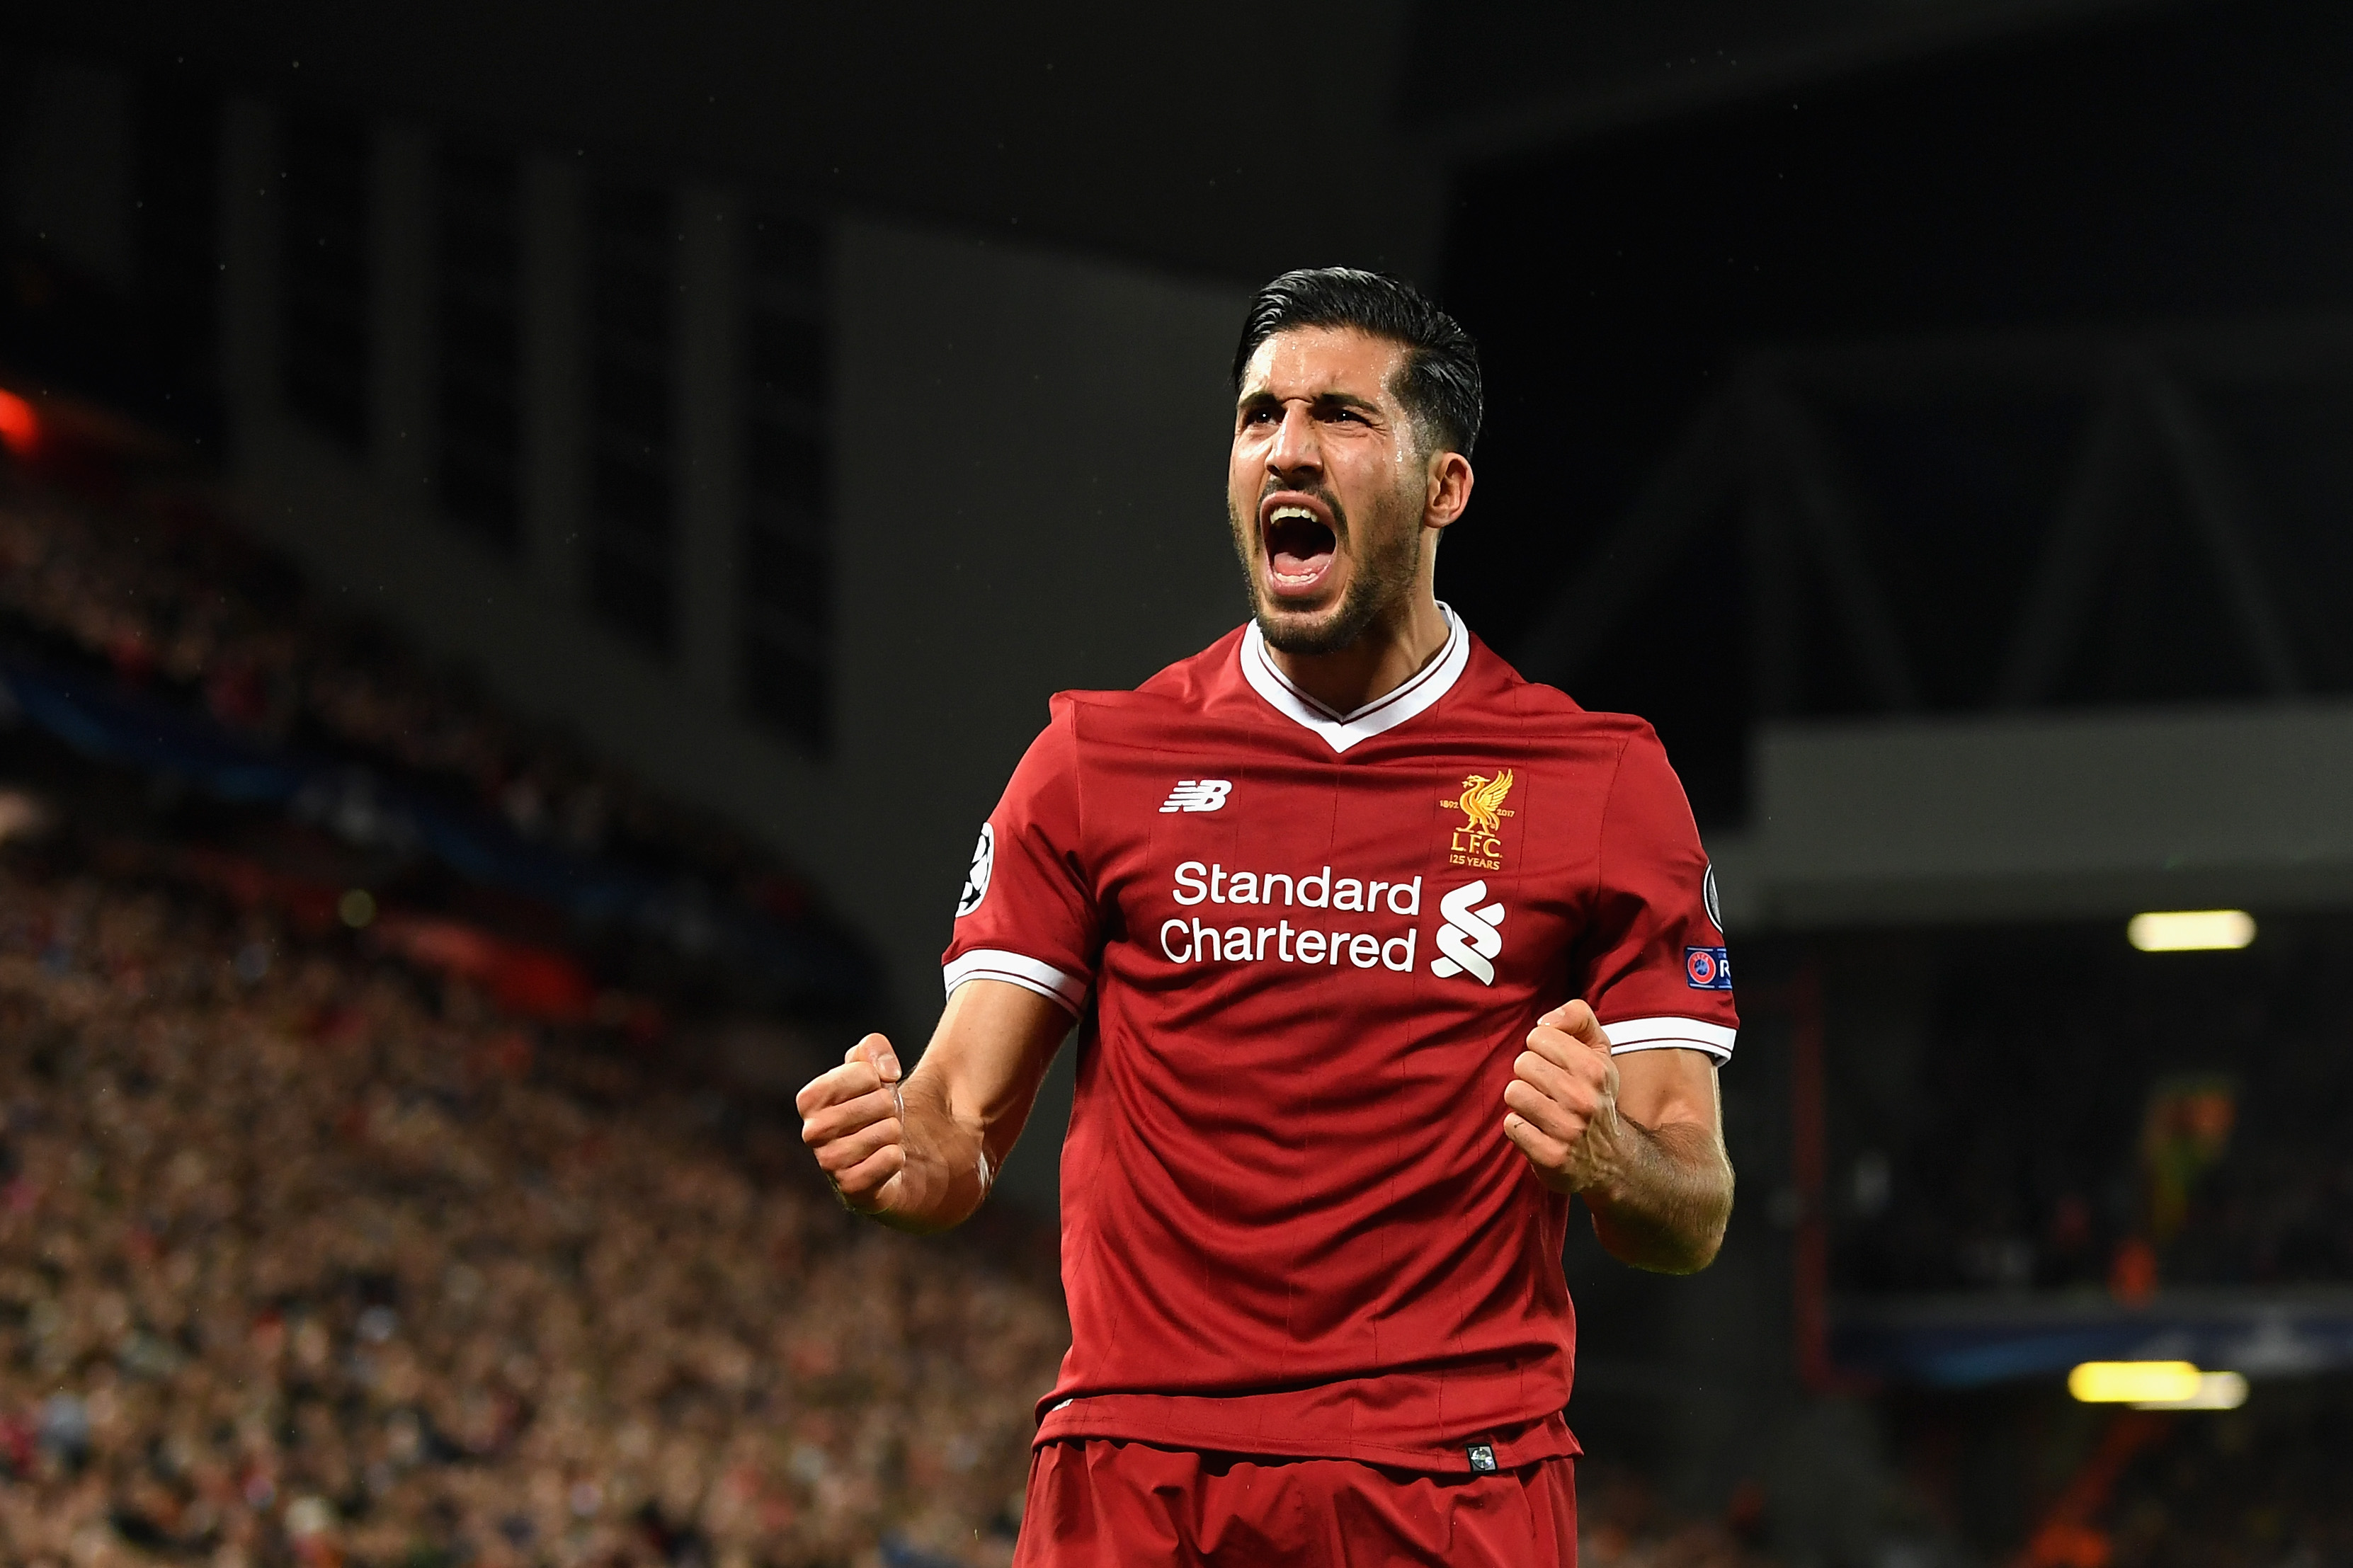 LIVERPOOL, ENGLAND - NOVEMBER 01:  Emre Can of Liverpool celebrates scoring his sides second goal during the UEFA Champions League group E match between Liverpool FC and NK Maribor at Anfield on November 1, 2017 in Liverpool, United Kingdom.  (Photo by Michael Regan/Getty Images)